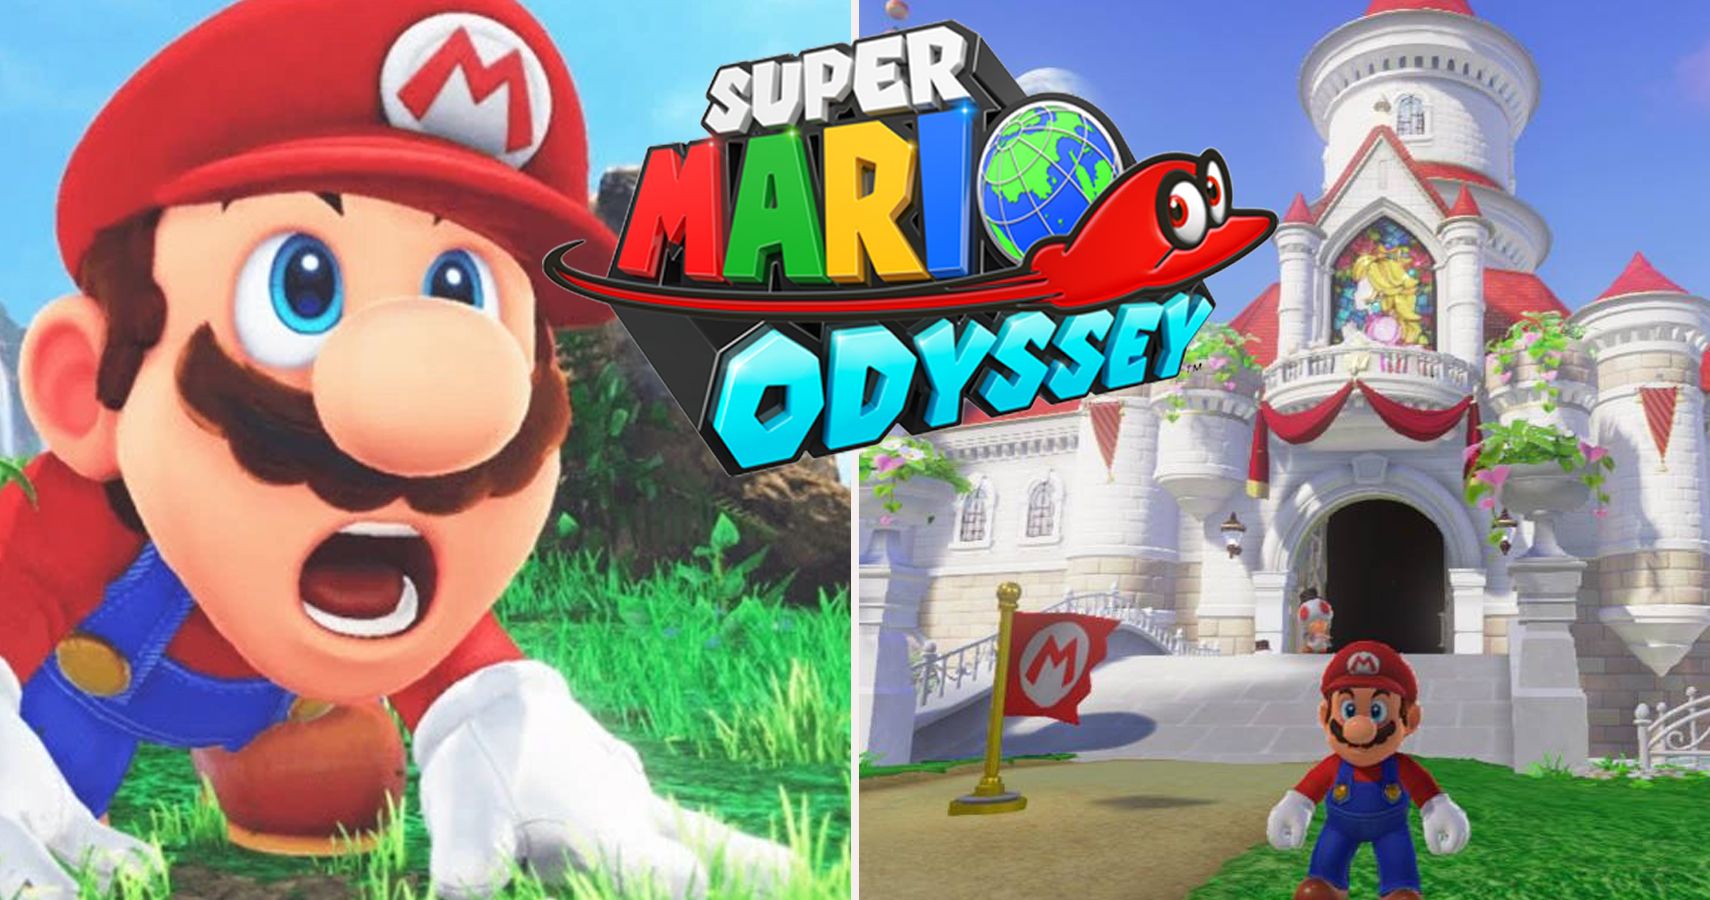 What If All Kingdoms Were Put On One Level? - Super Mario Odyssey